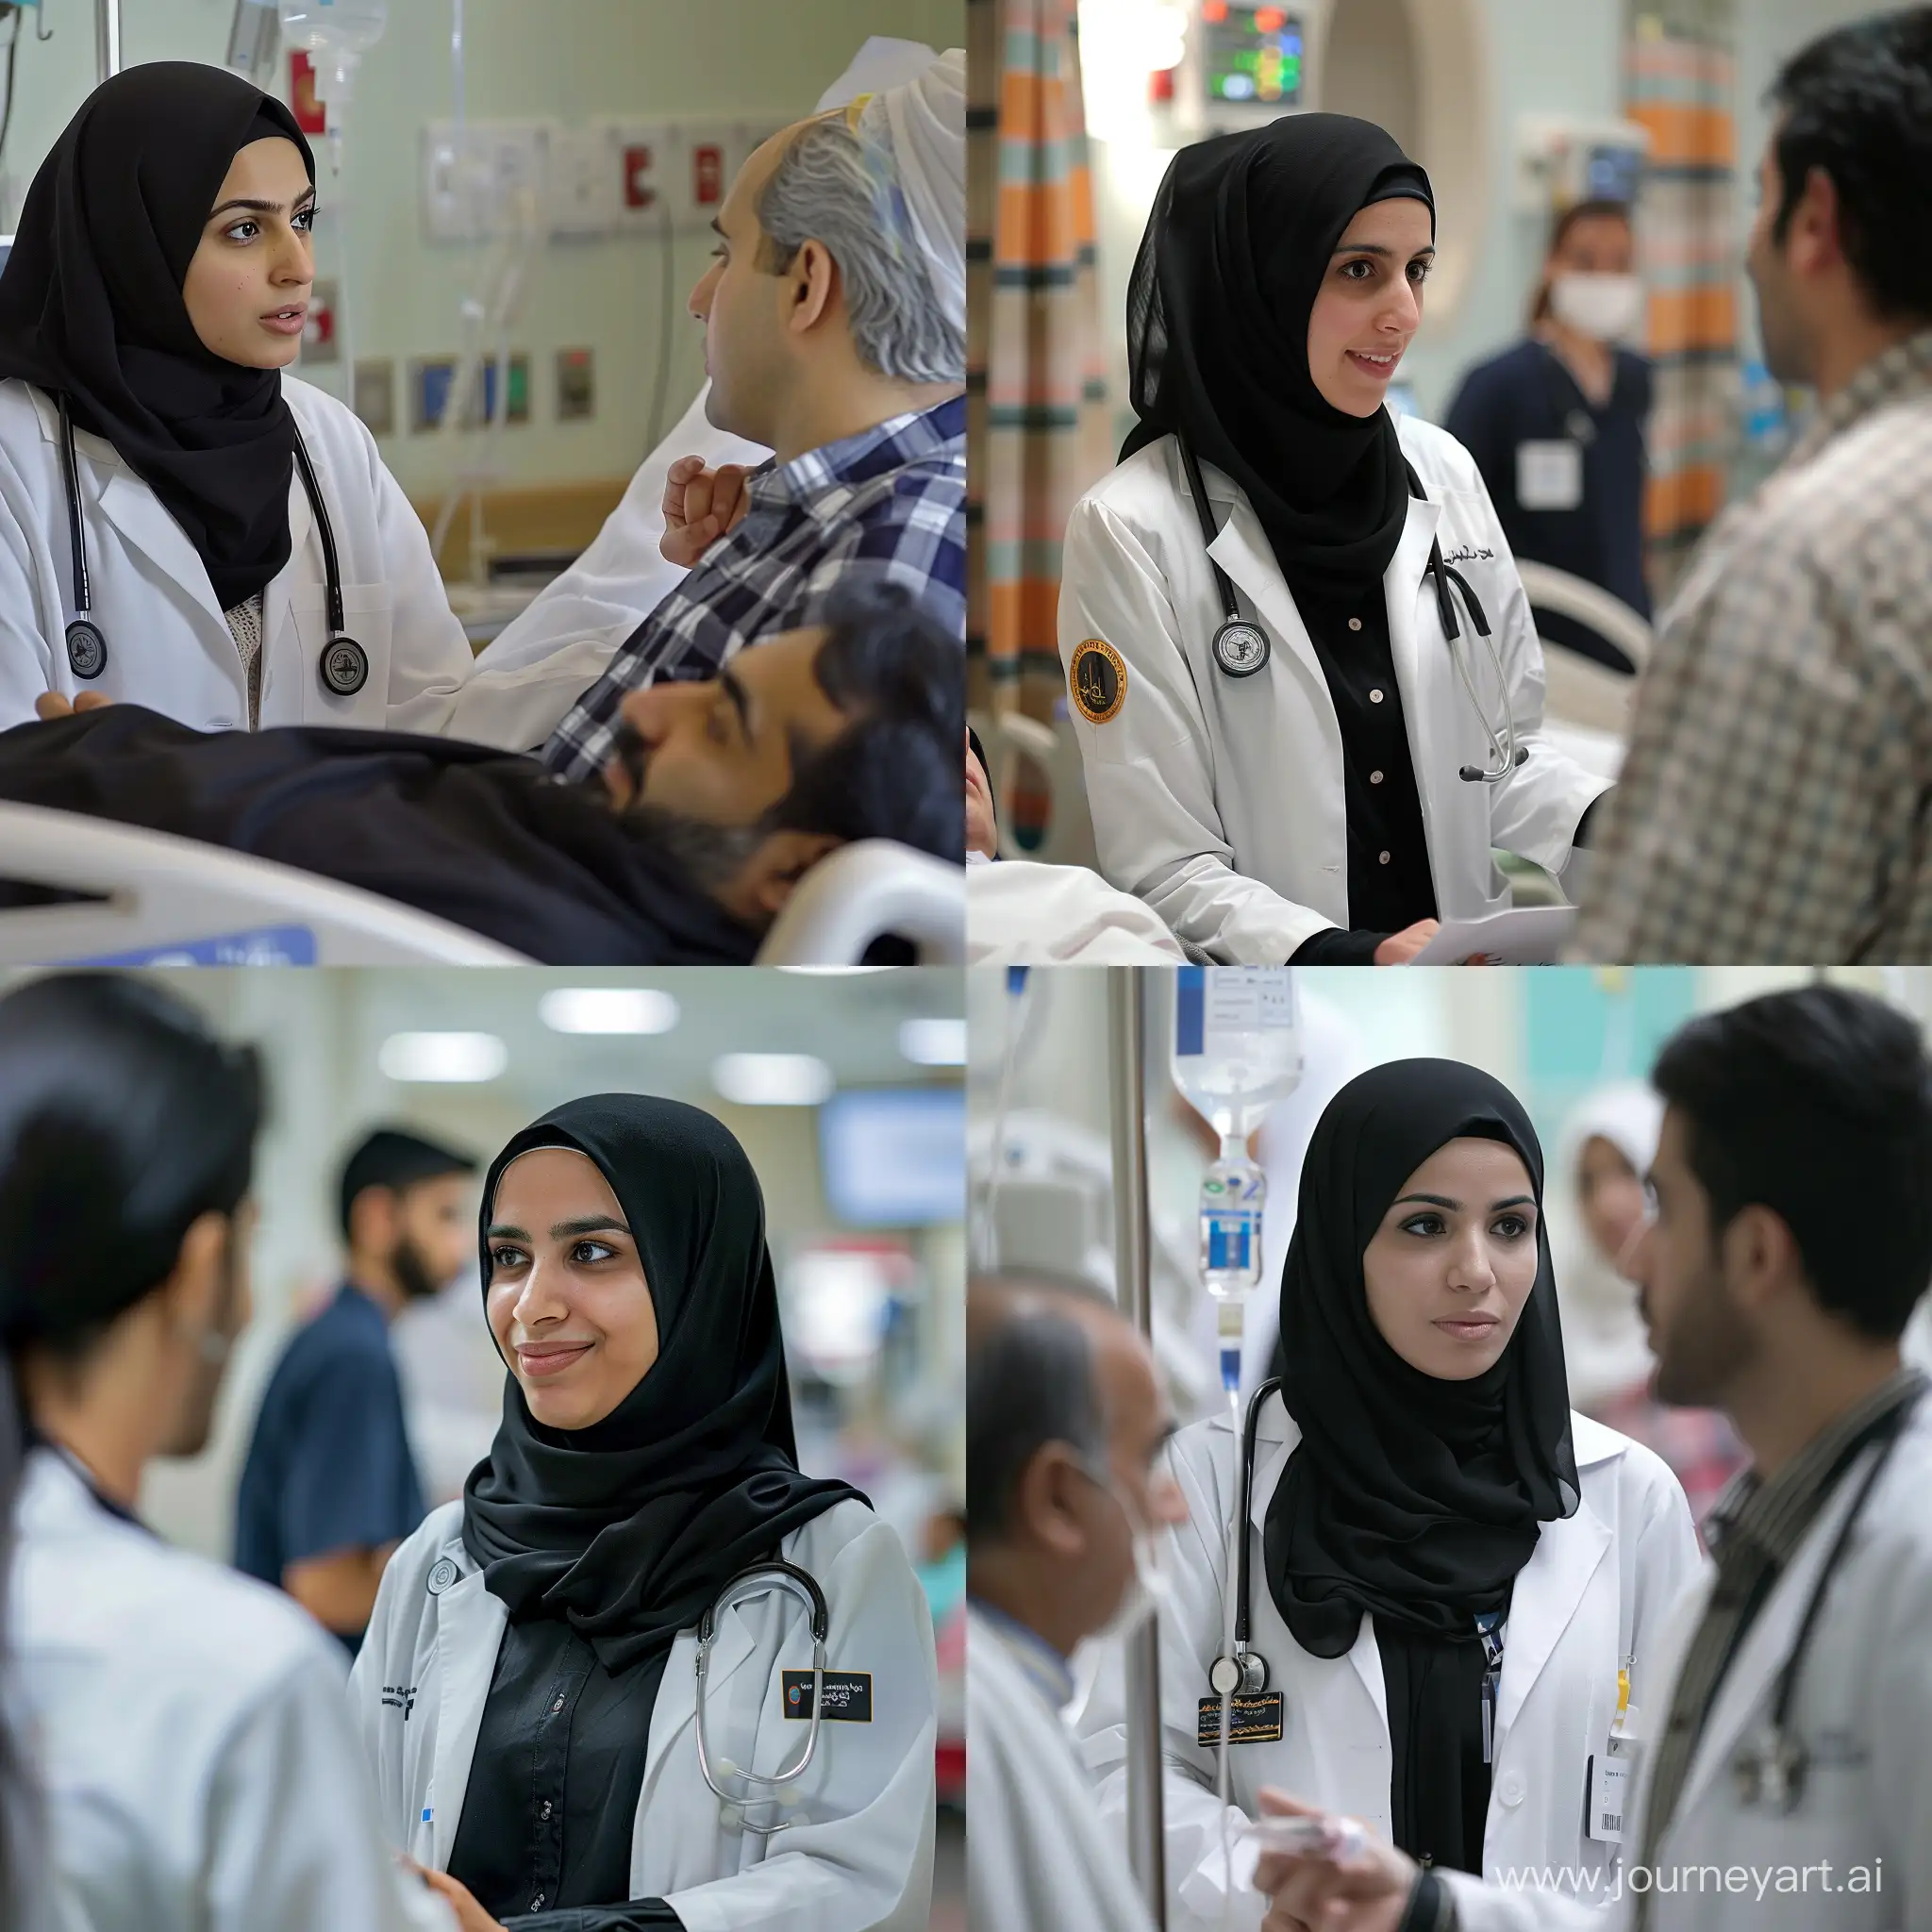 a female medical student wearing black hijab and white coats explaining  something to a patient at a hospital
viewing from meters away 